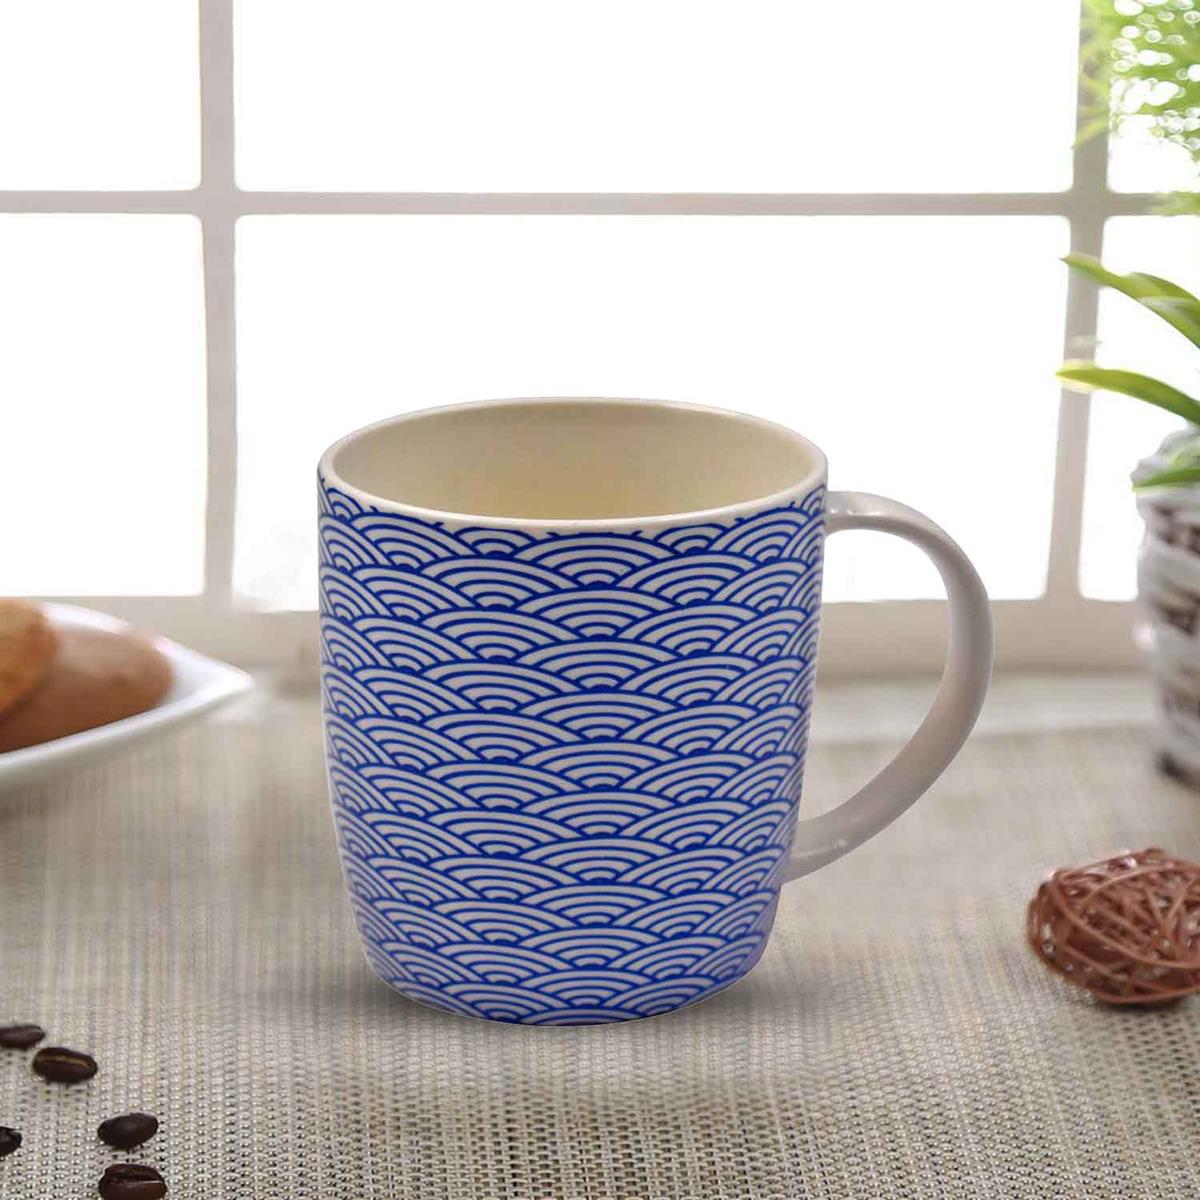 Kookee Ceramic Coffee or Tea Mug with handle for Office, Home or Gifting - 325ml (3525-A)